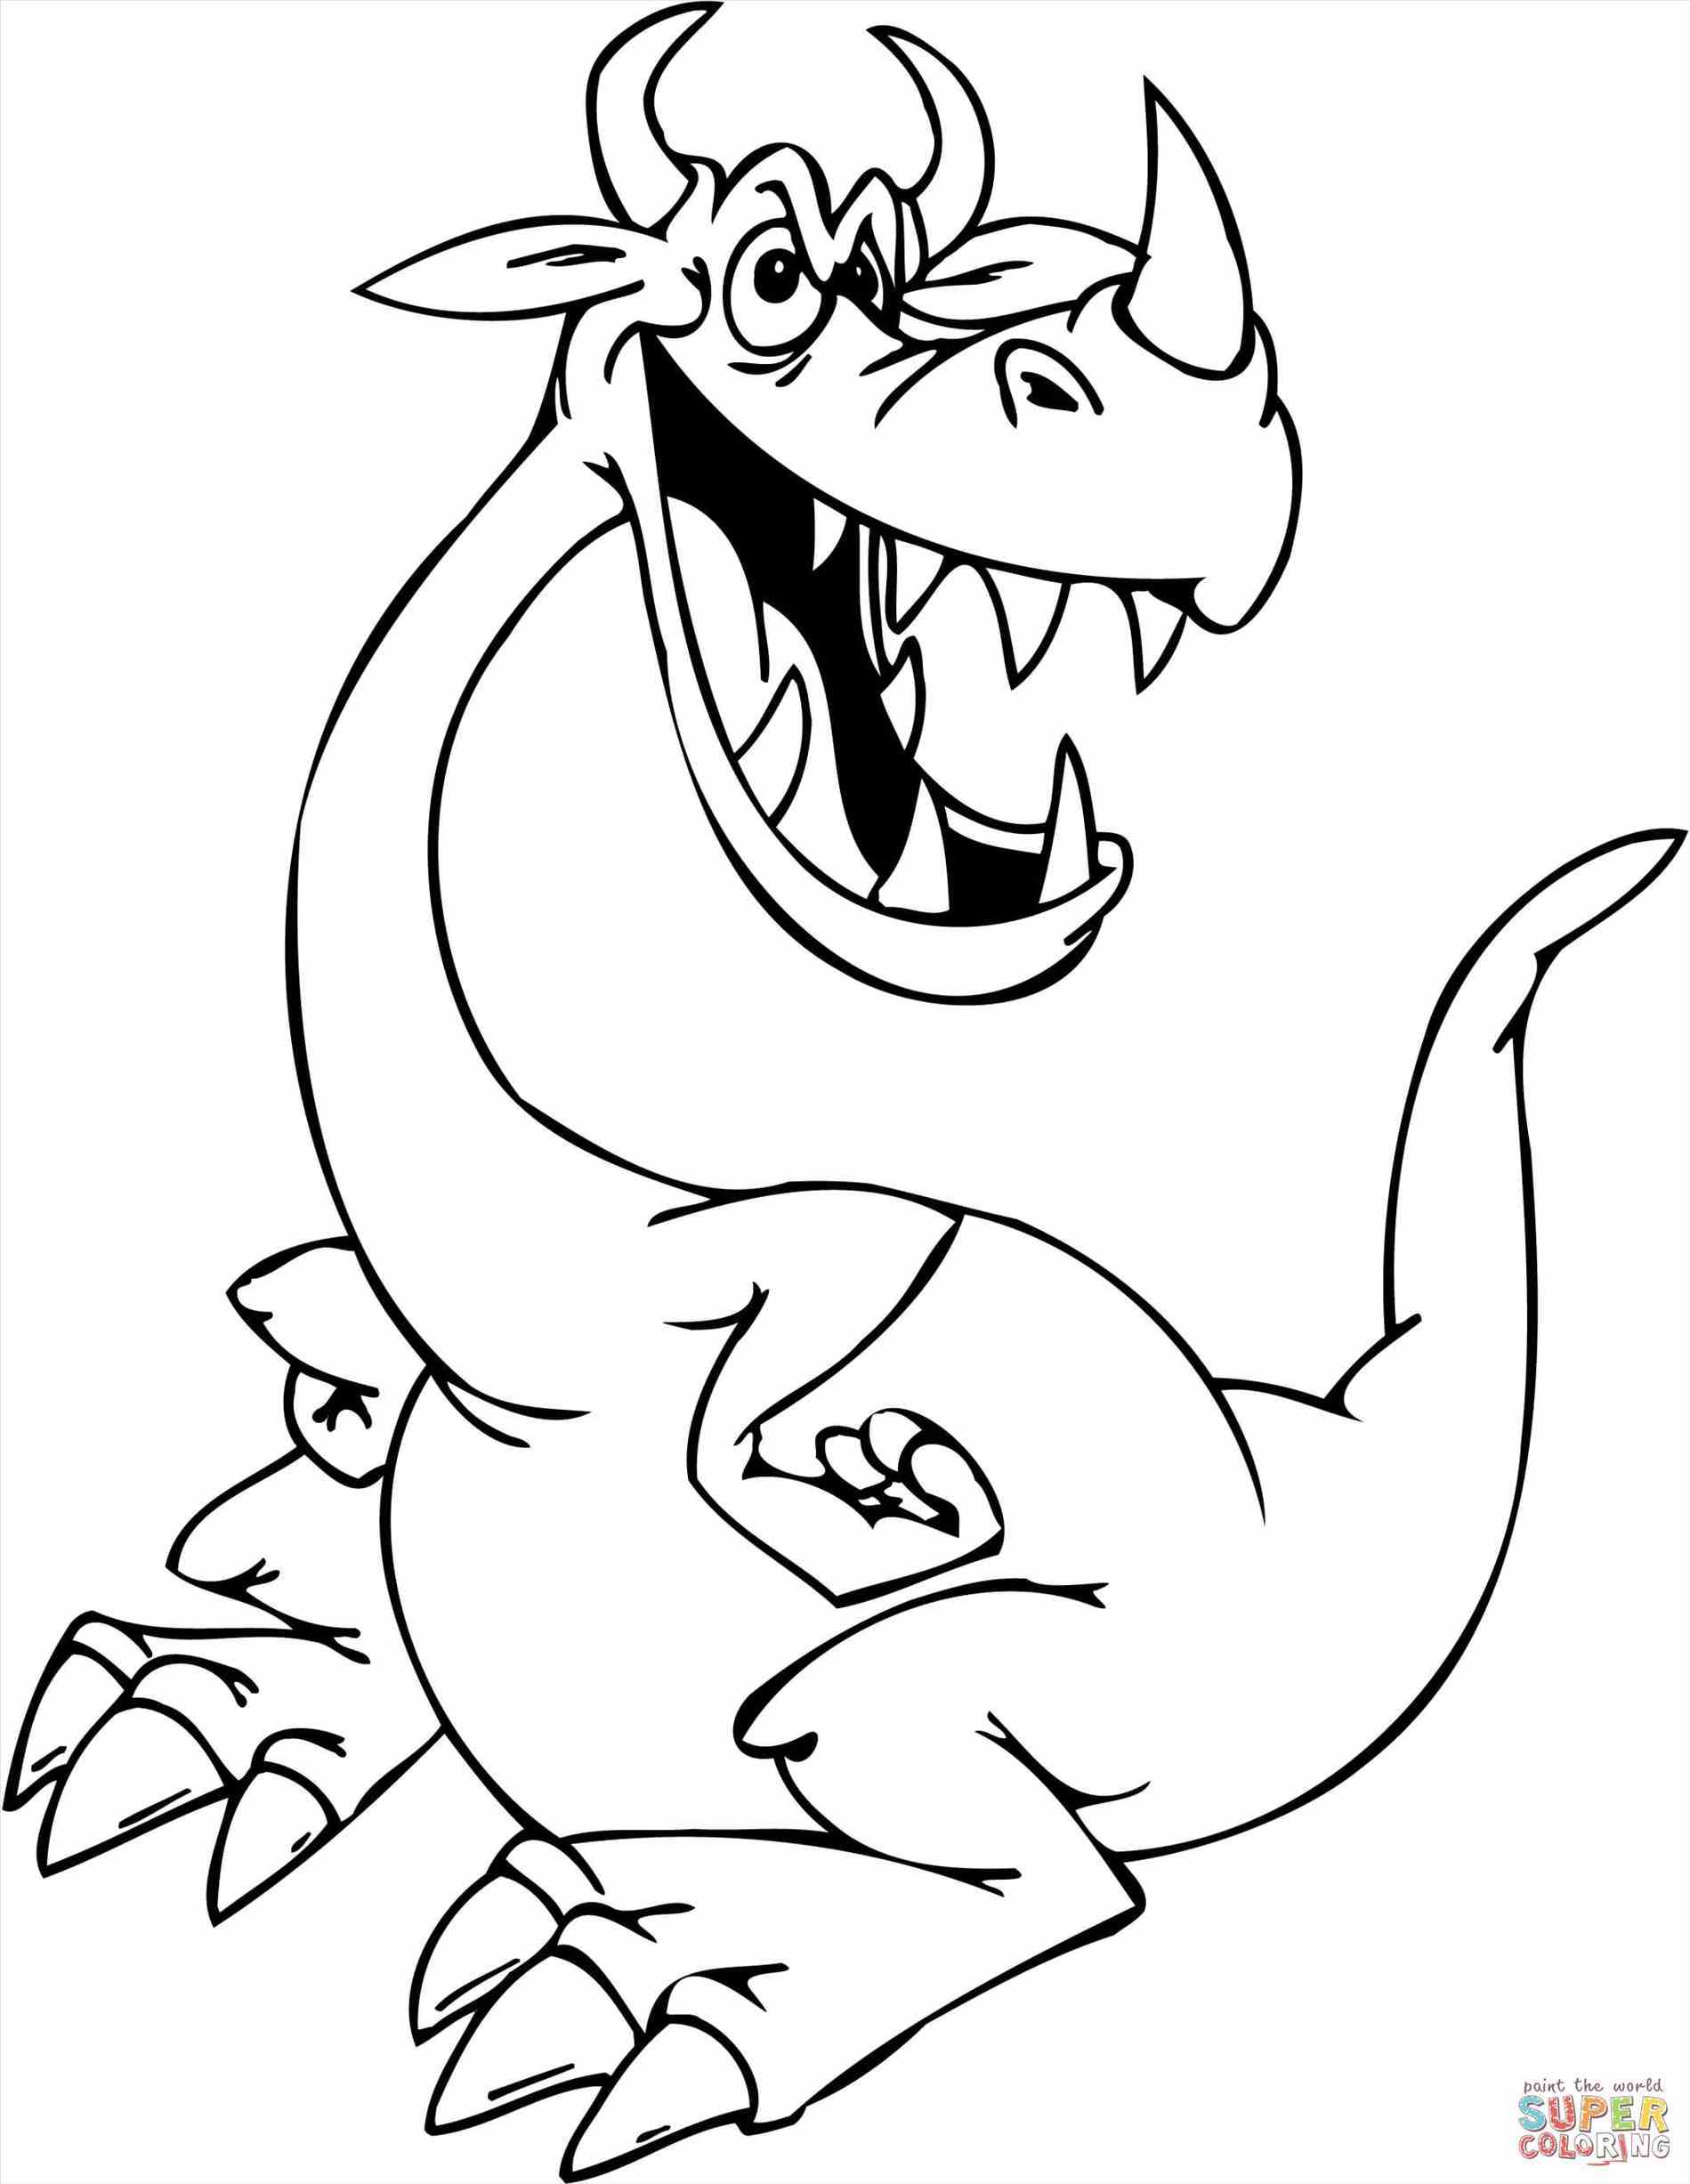 Hydra Dragon Coloring Pages at GetColorings.com | Free printable